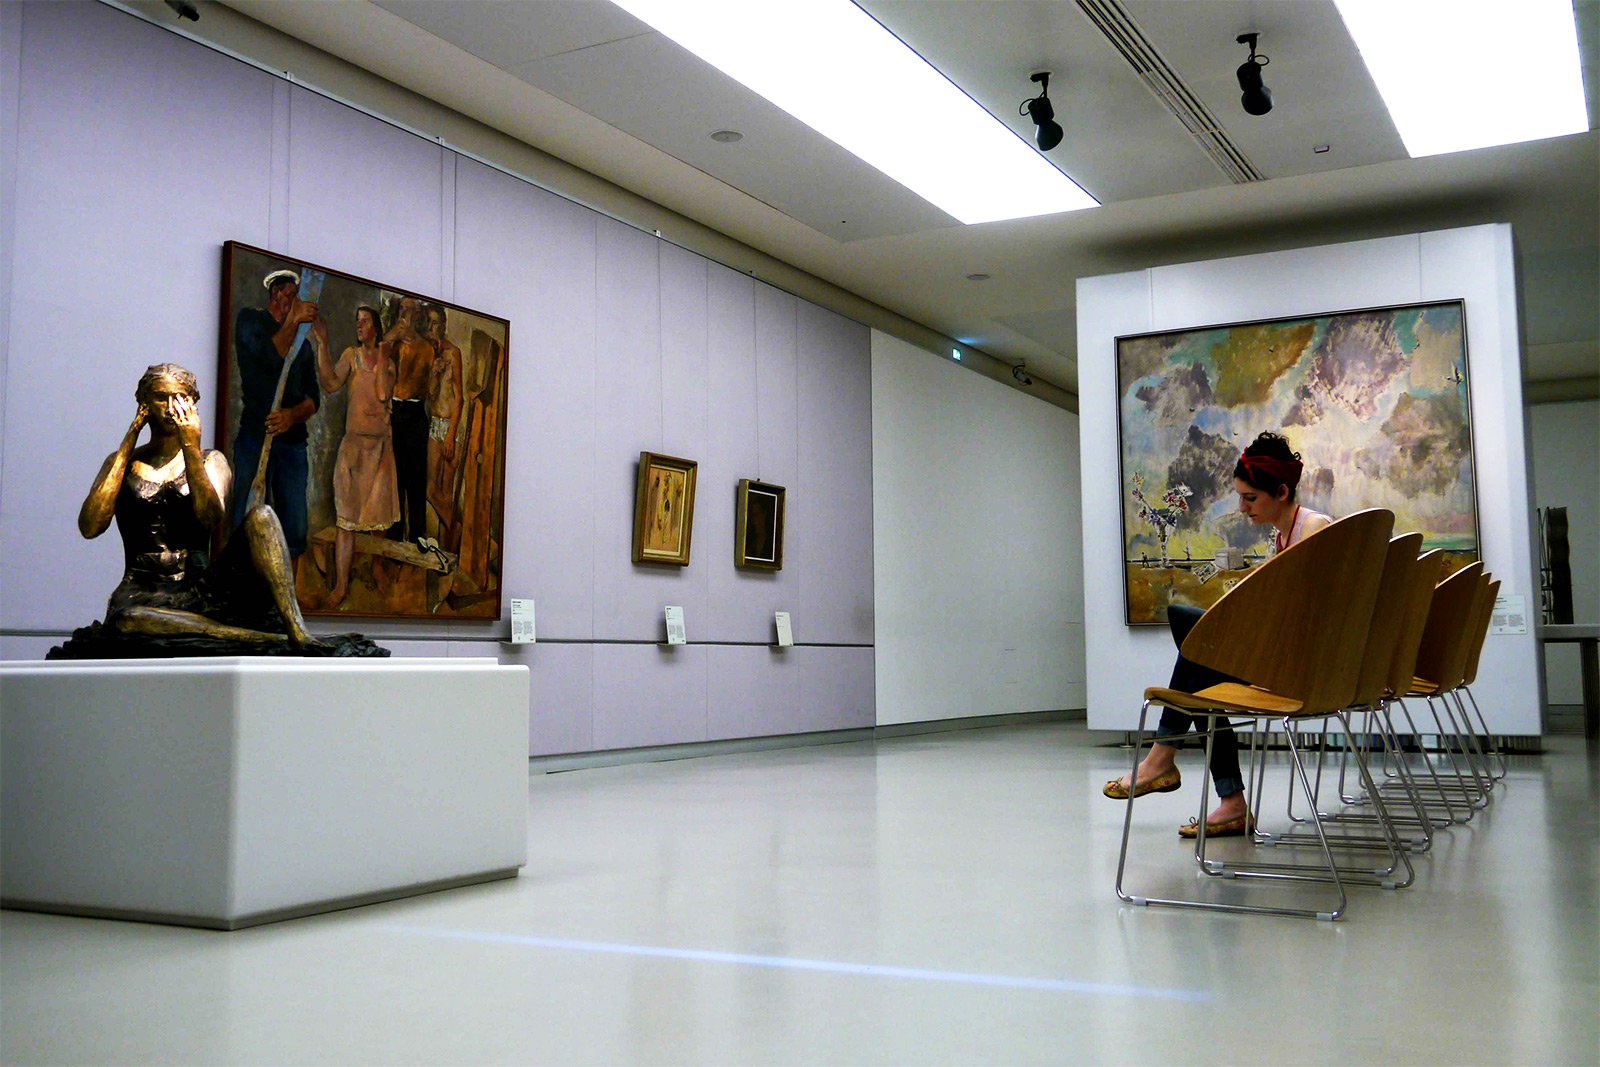 How to see masterpieces by Pablo Picasso and Modigliani in Milan